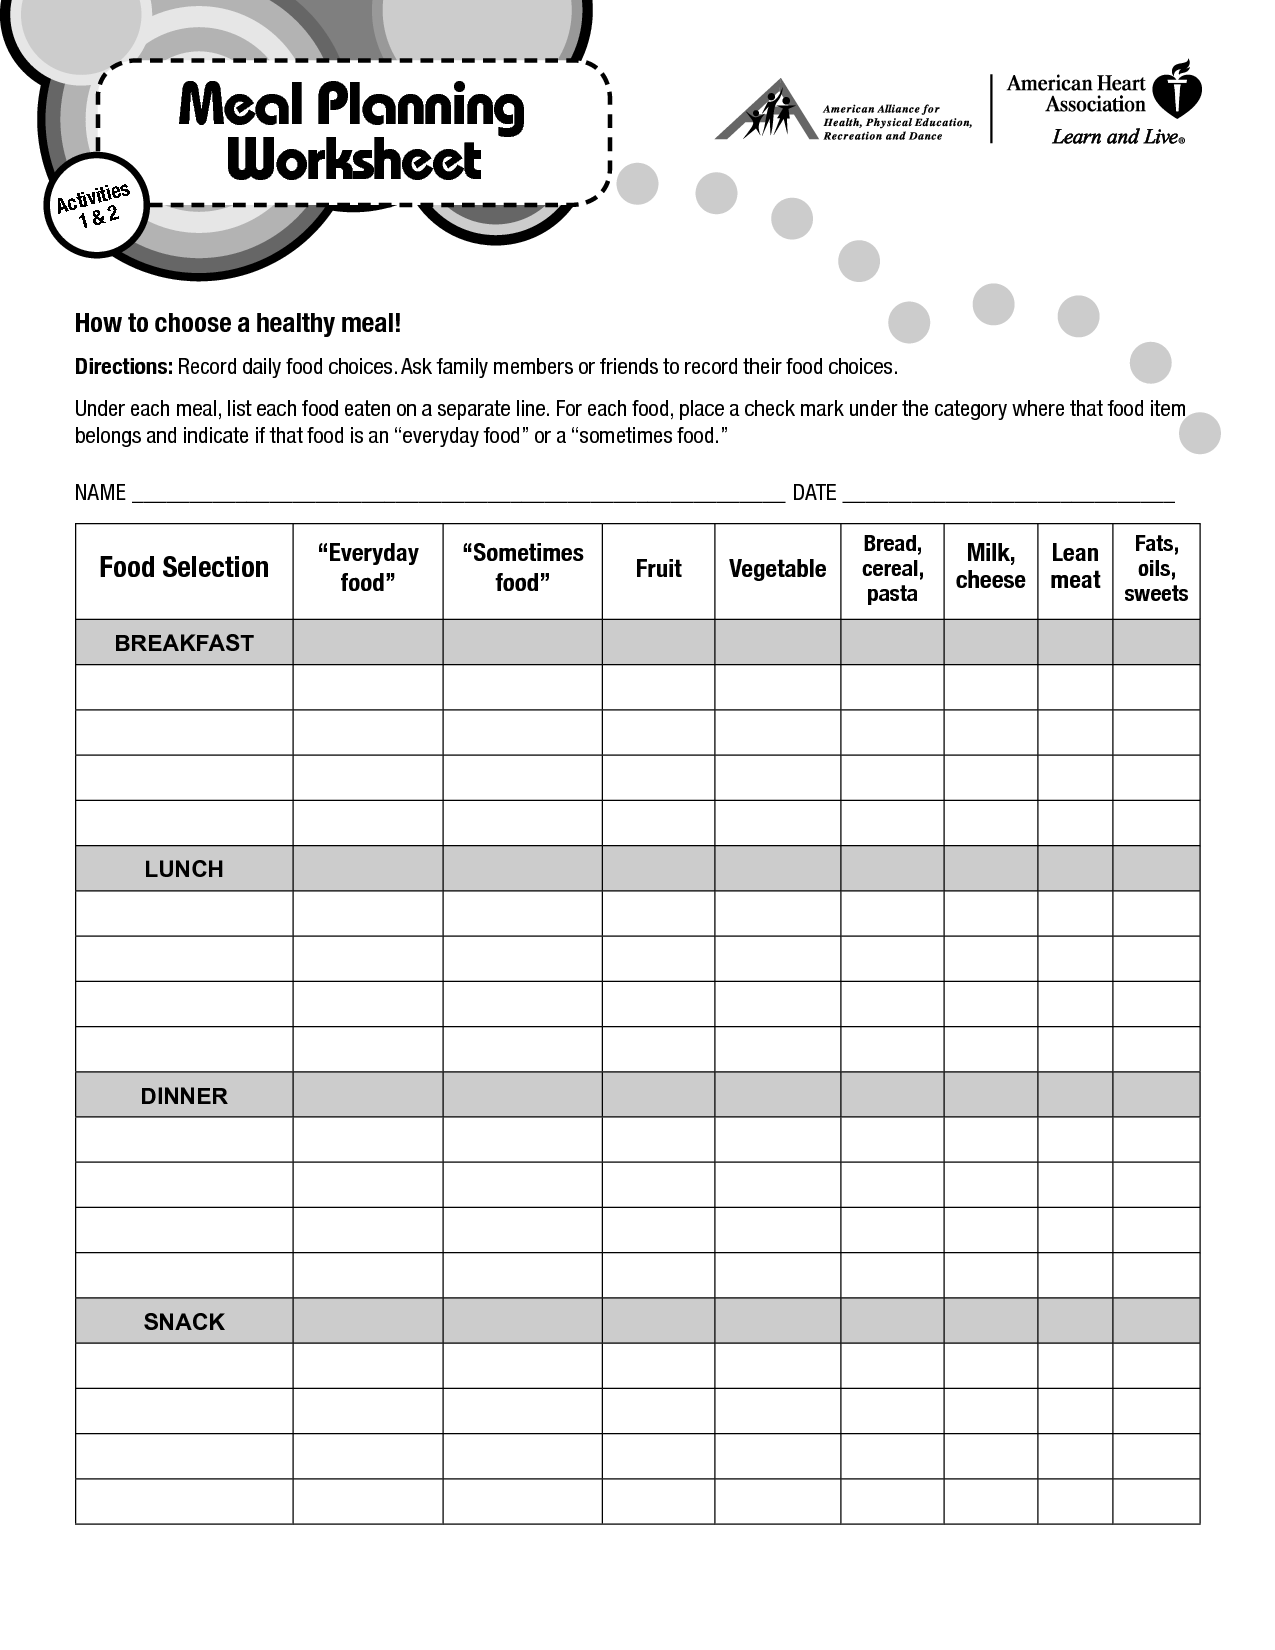 Daily Meal Planning Worksheet Image